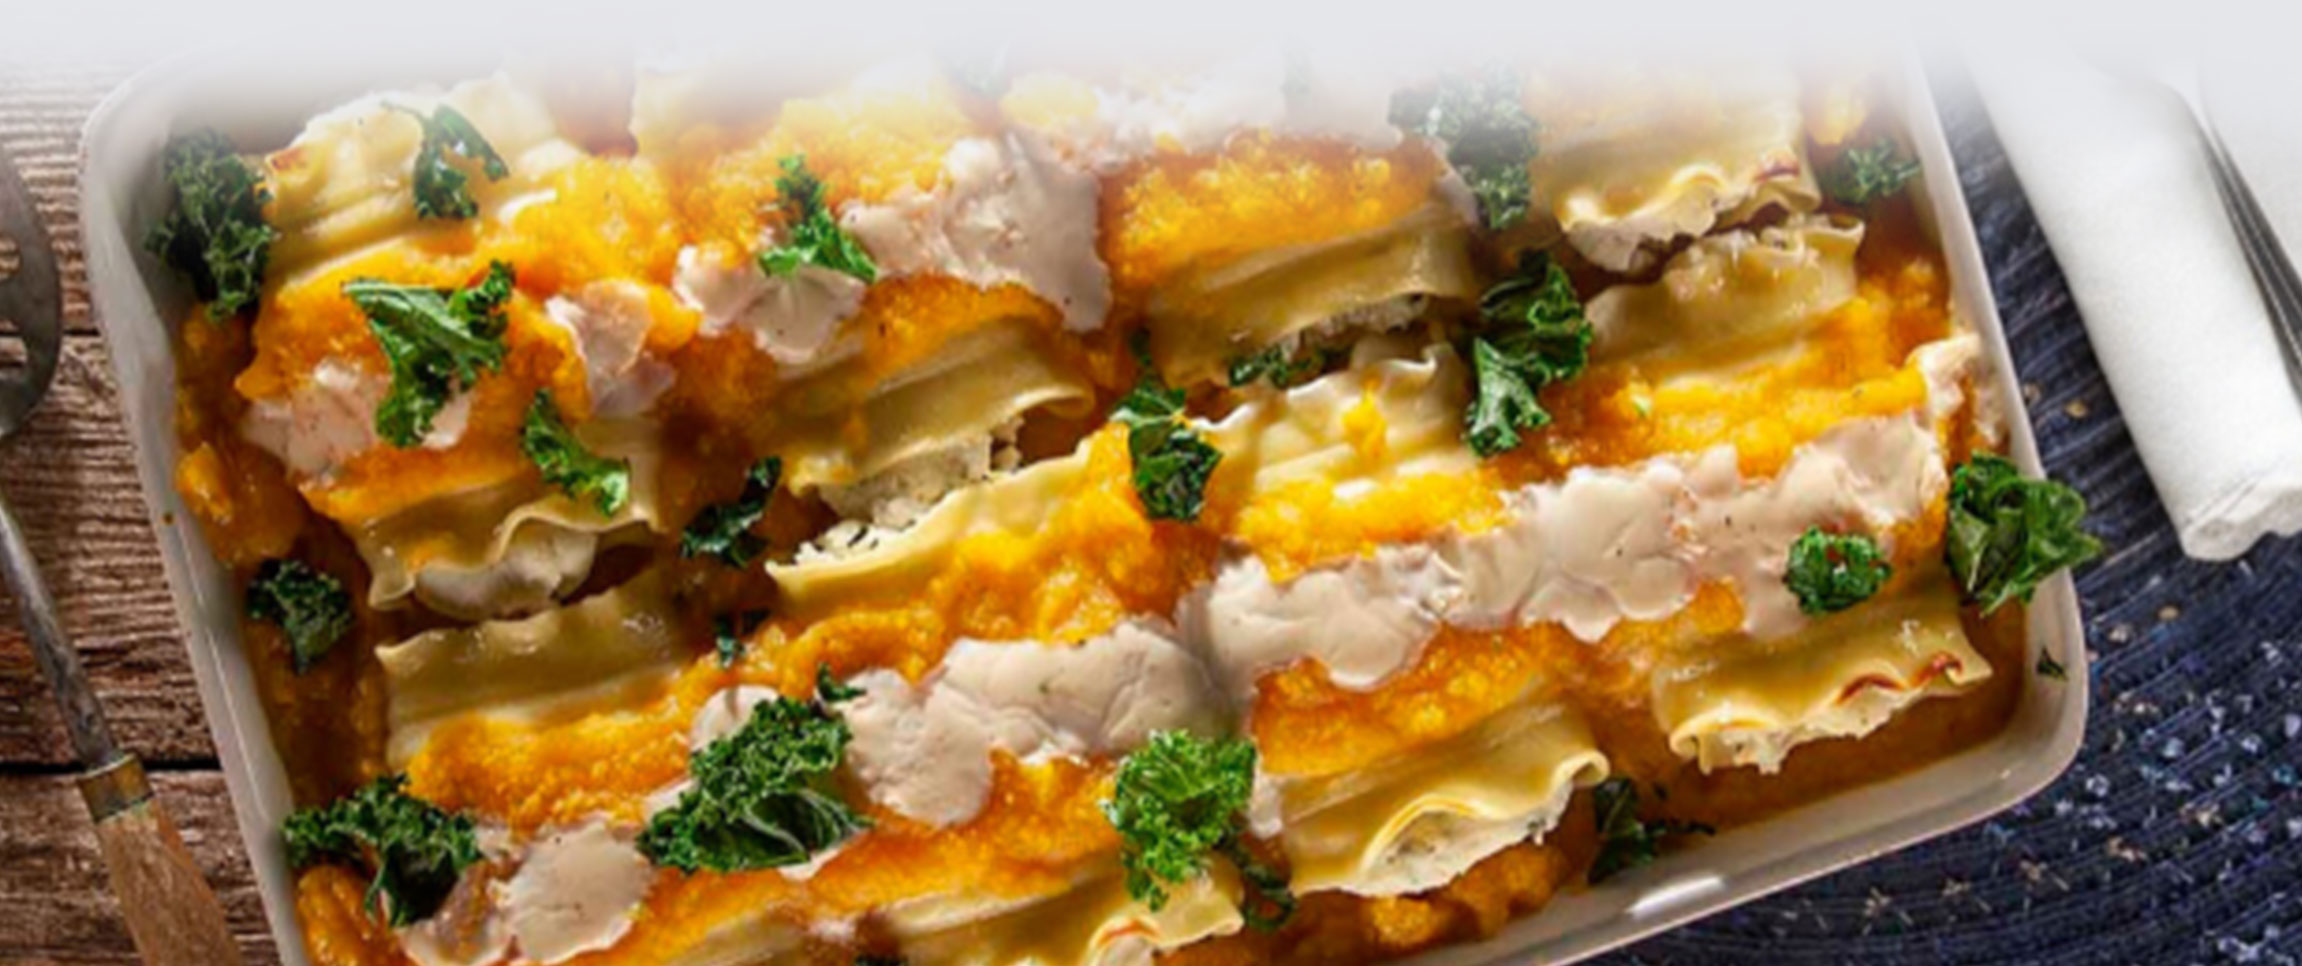 Cheese Lasagna Rollettes with Butternut Squash and Kale